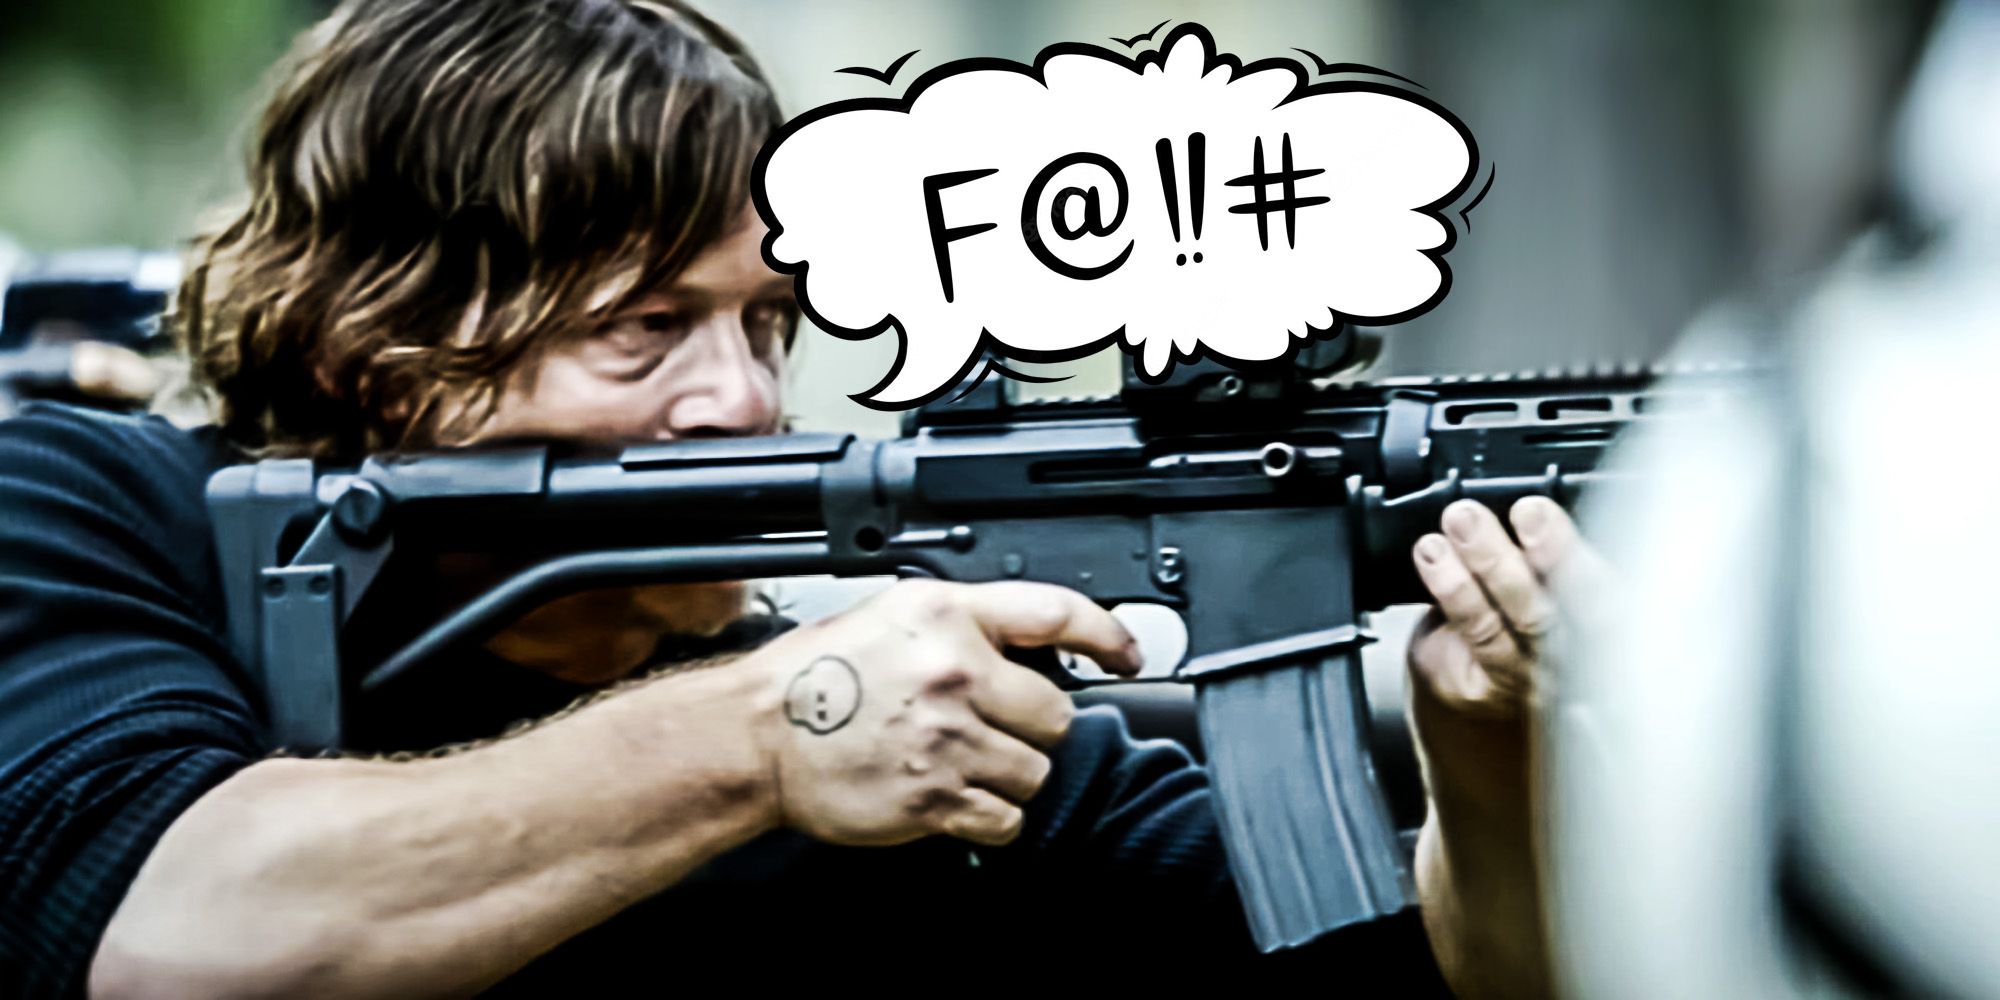 The walking Dead Daryl dropped first F bomb